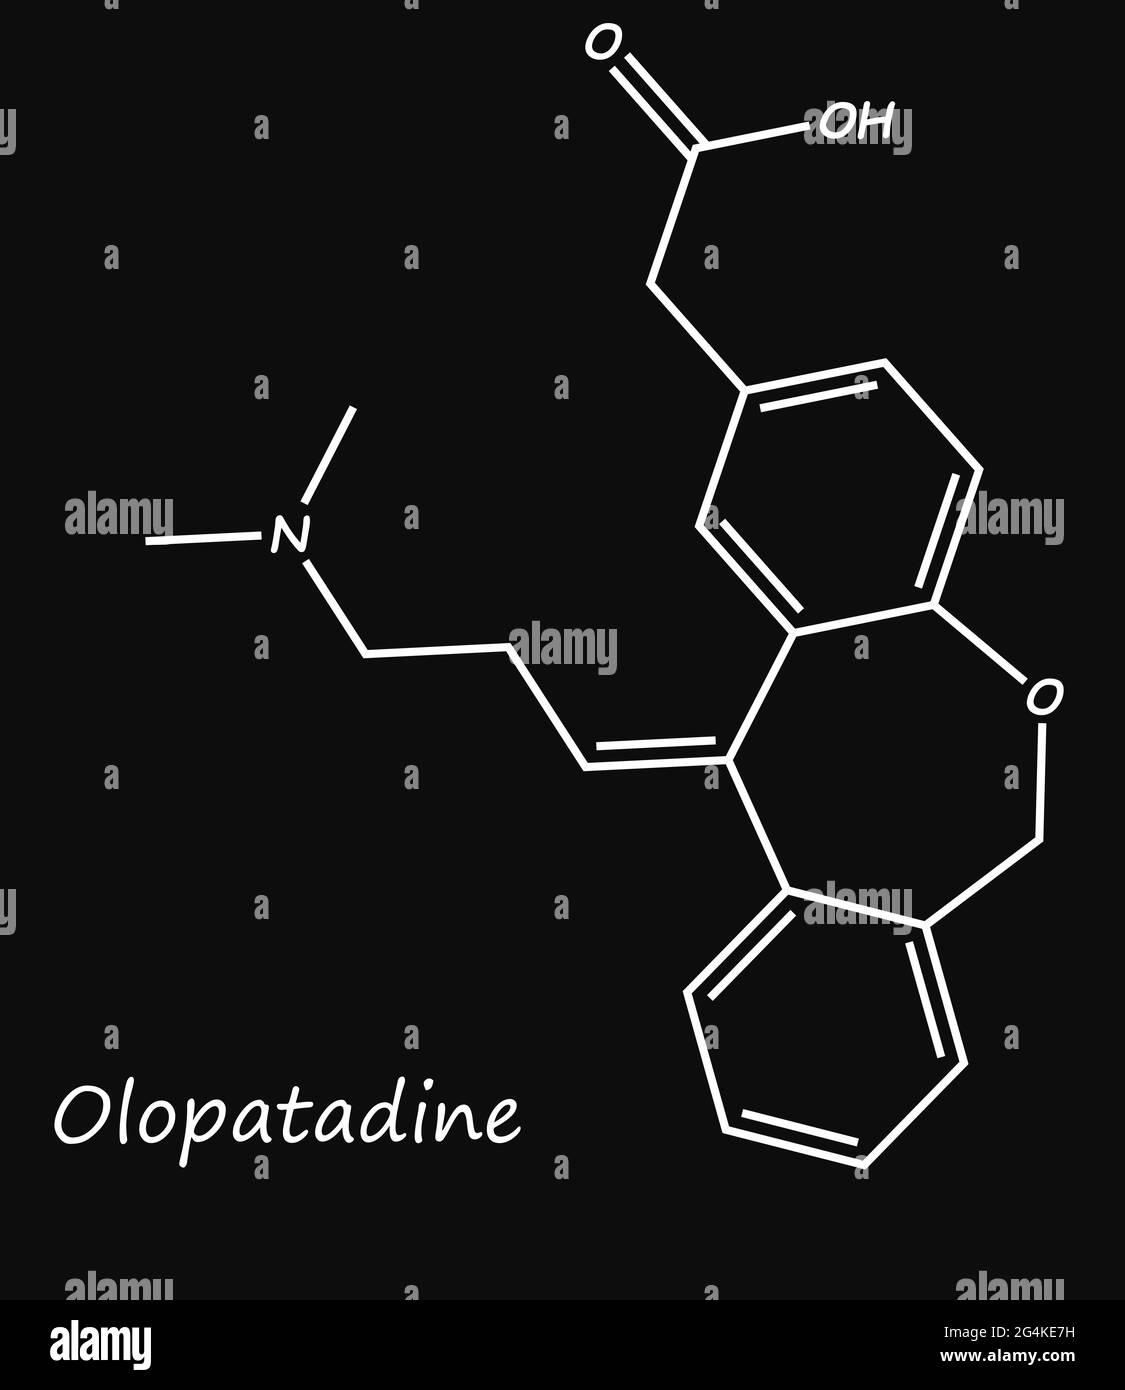 Olopatadine, is a medication used to decrease the symptoms of allergic conjunctivitis and allergic rhinitis (hay fever). Stock Photo